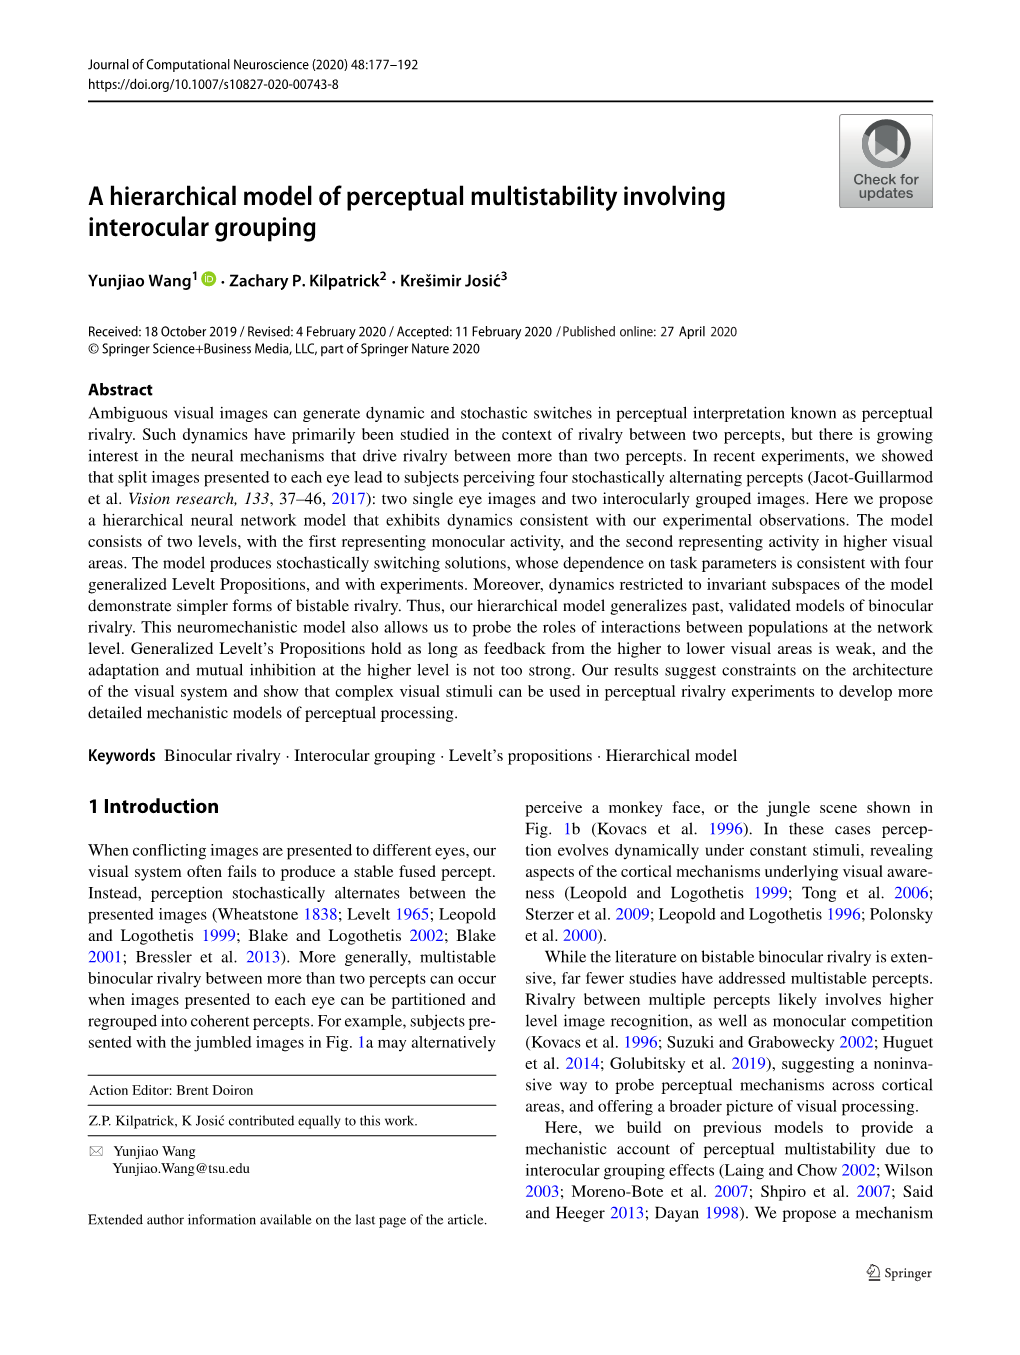 A Hierarchical Model of Perceptual Multistability Involving Interocular Grouping